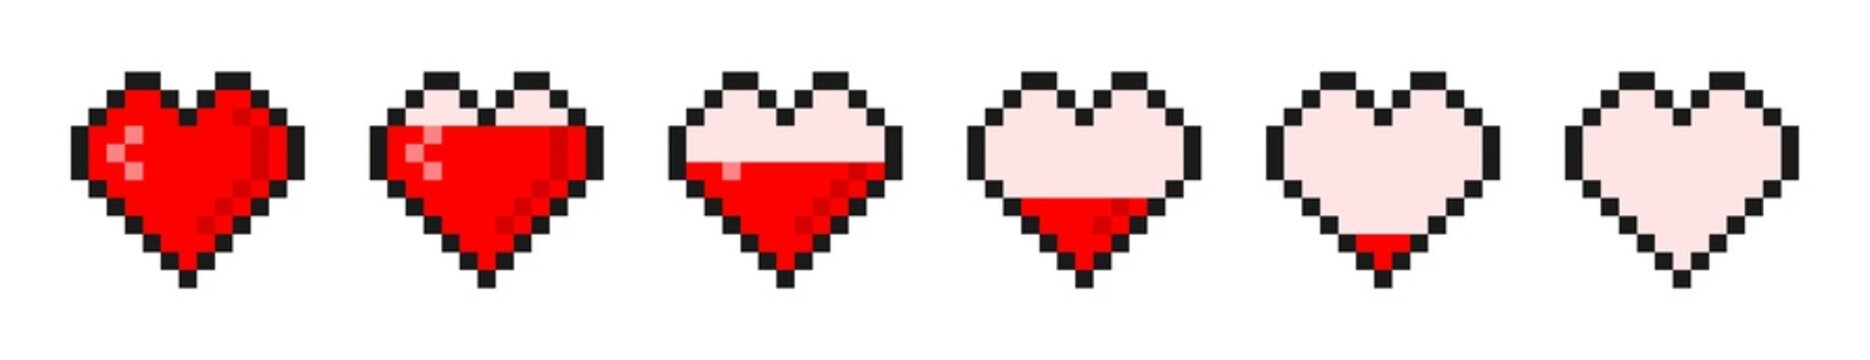 Pixel heart with game life bar. Pixel art hearts icons and health bar. Symbols set in 8 bit styles. Vector.